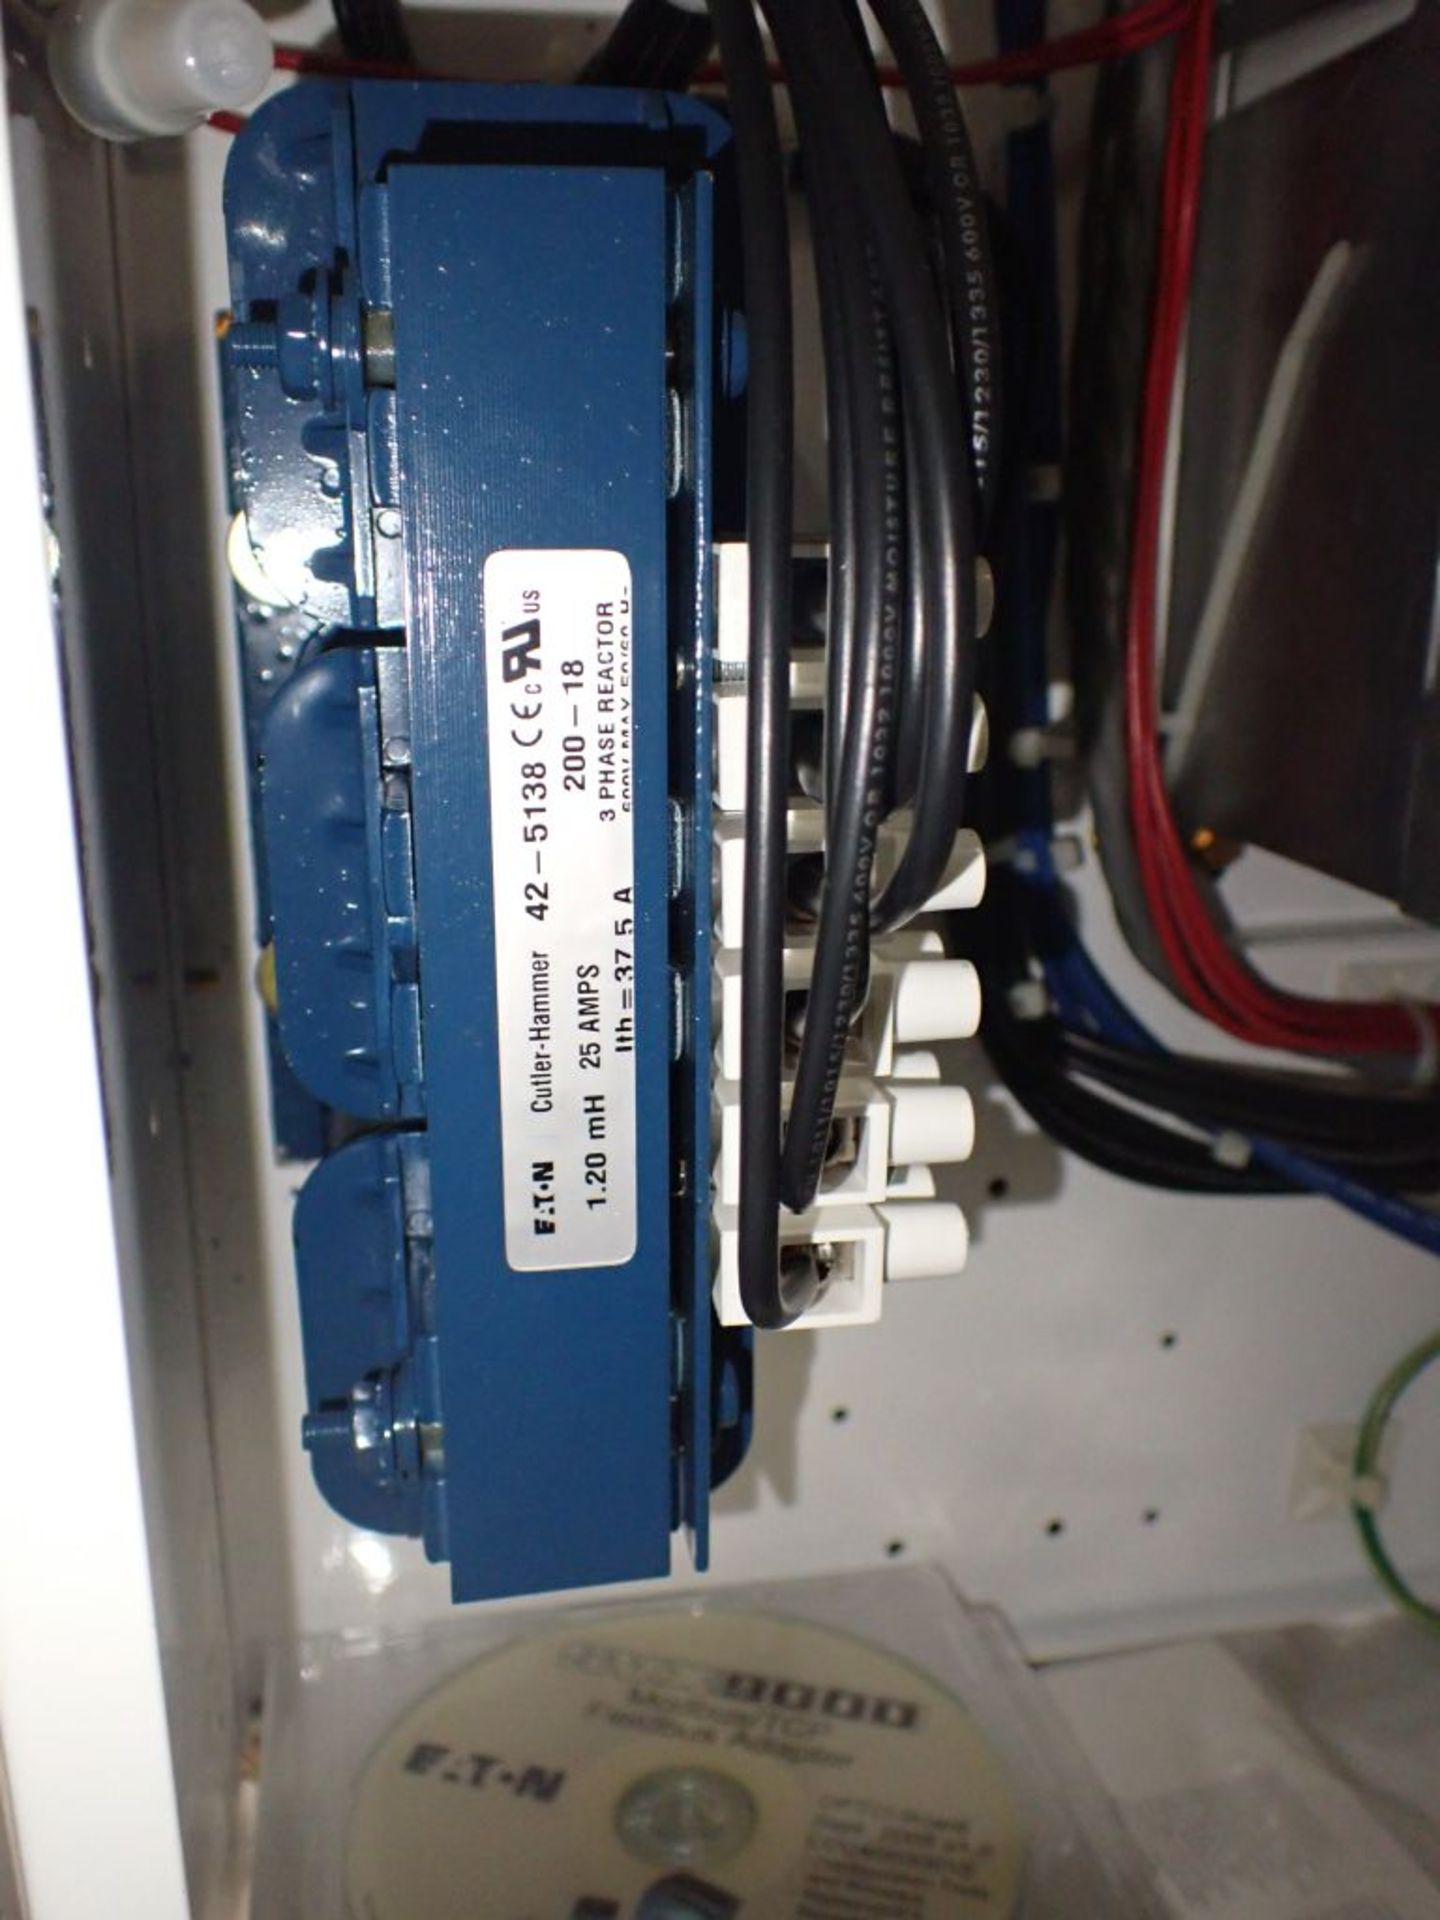 Eaton Freedom 2100 Series Motor Control Center | (4) SVX900-30A, with Eaton AF Drives, SVX9000, - Image 33 of 60